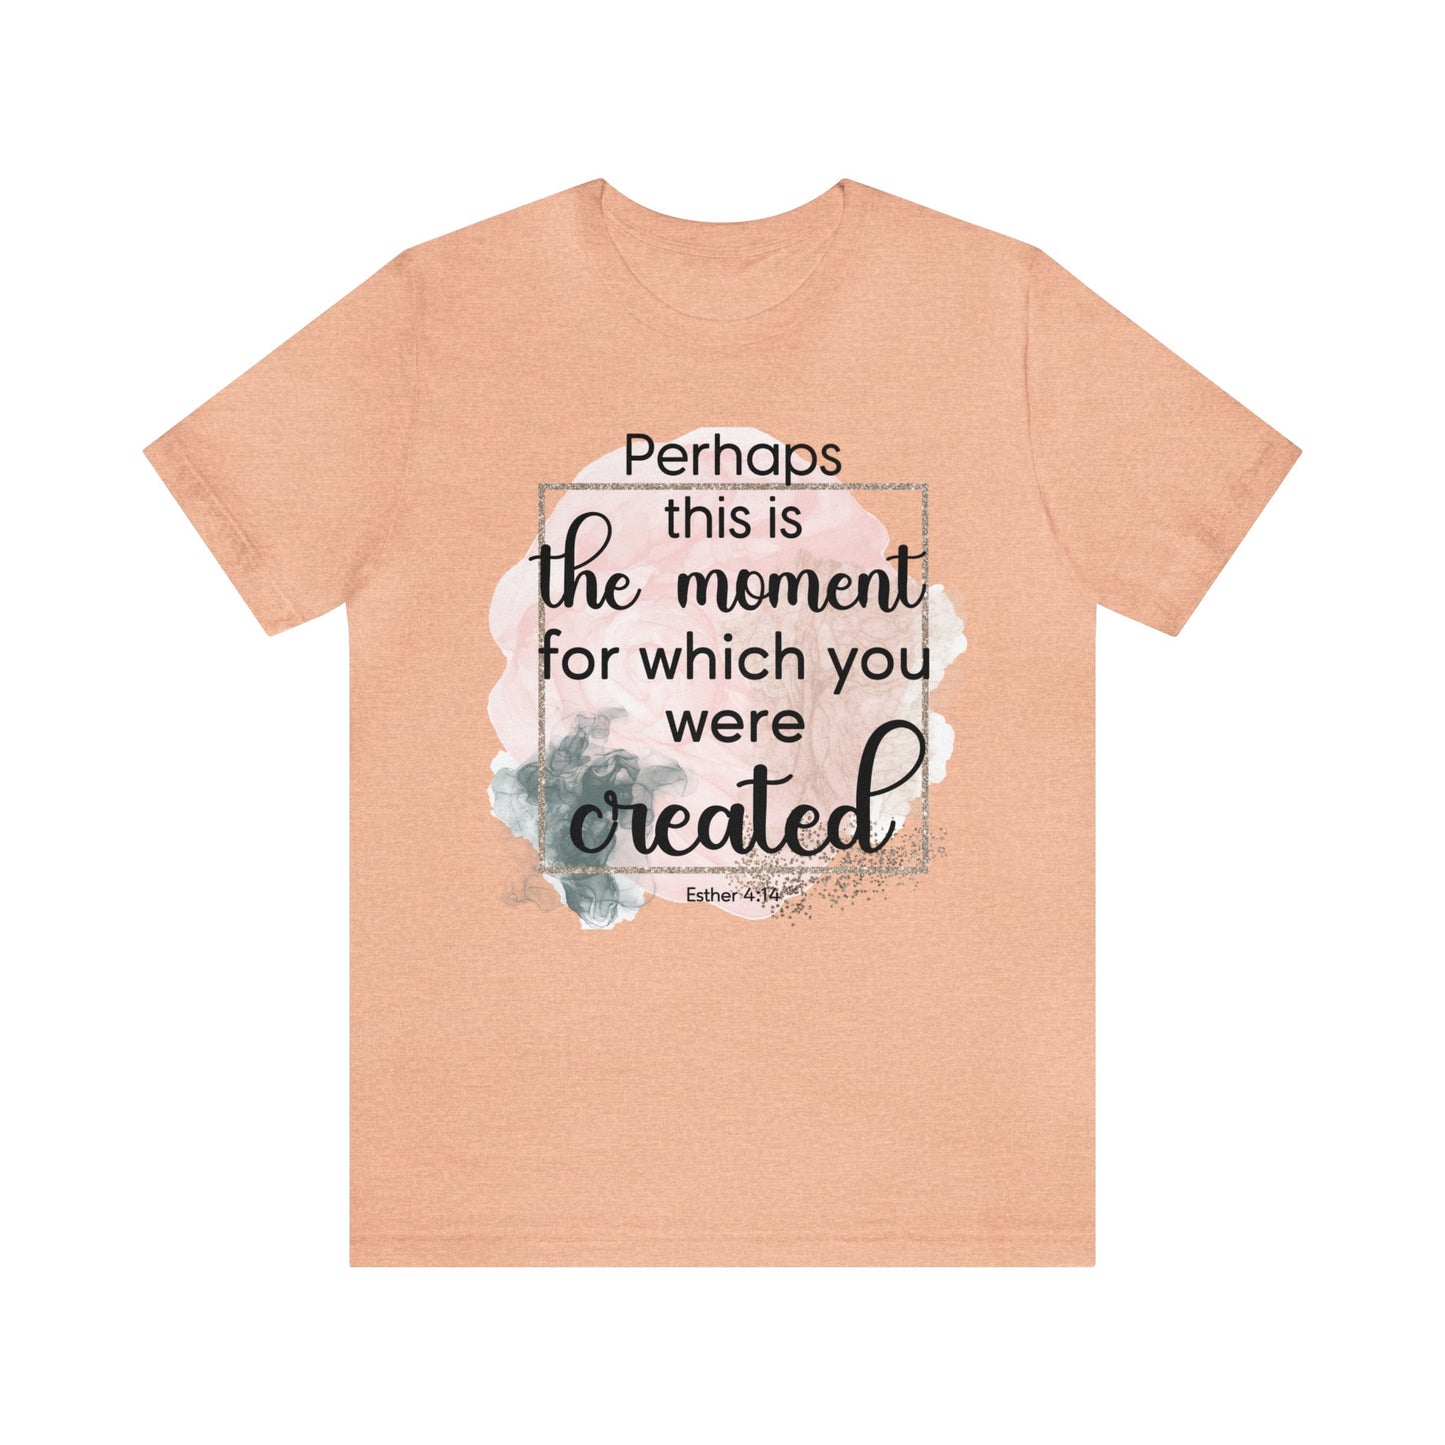 Perhaps This Is The Moment For Which You Were Created Shirt, Faith T-Shirt, Religious Tee, Gift for Christian Friend (Faith-53)